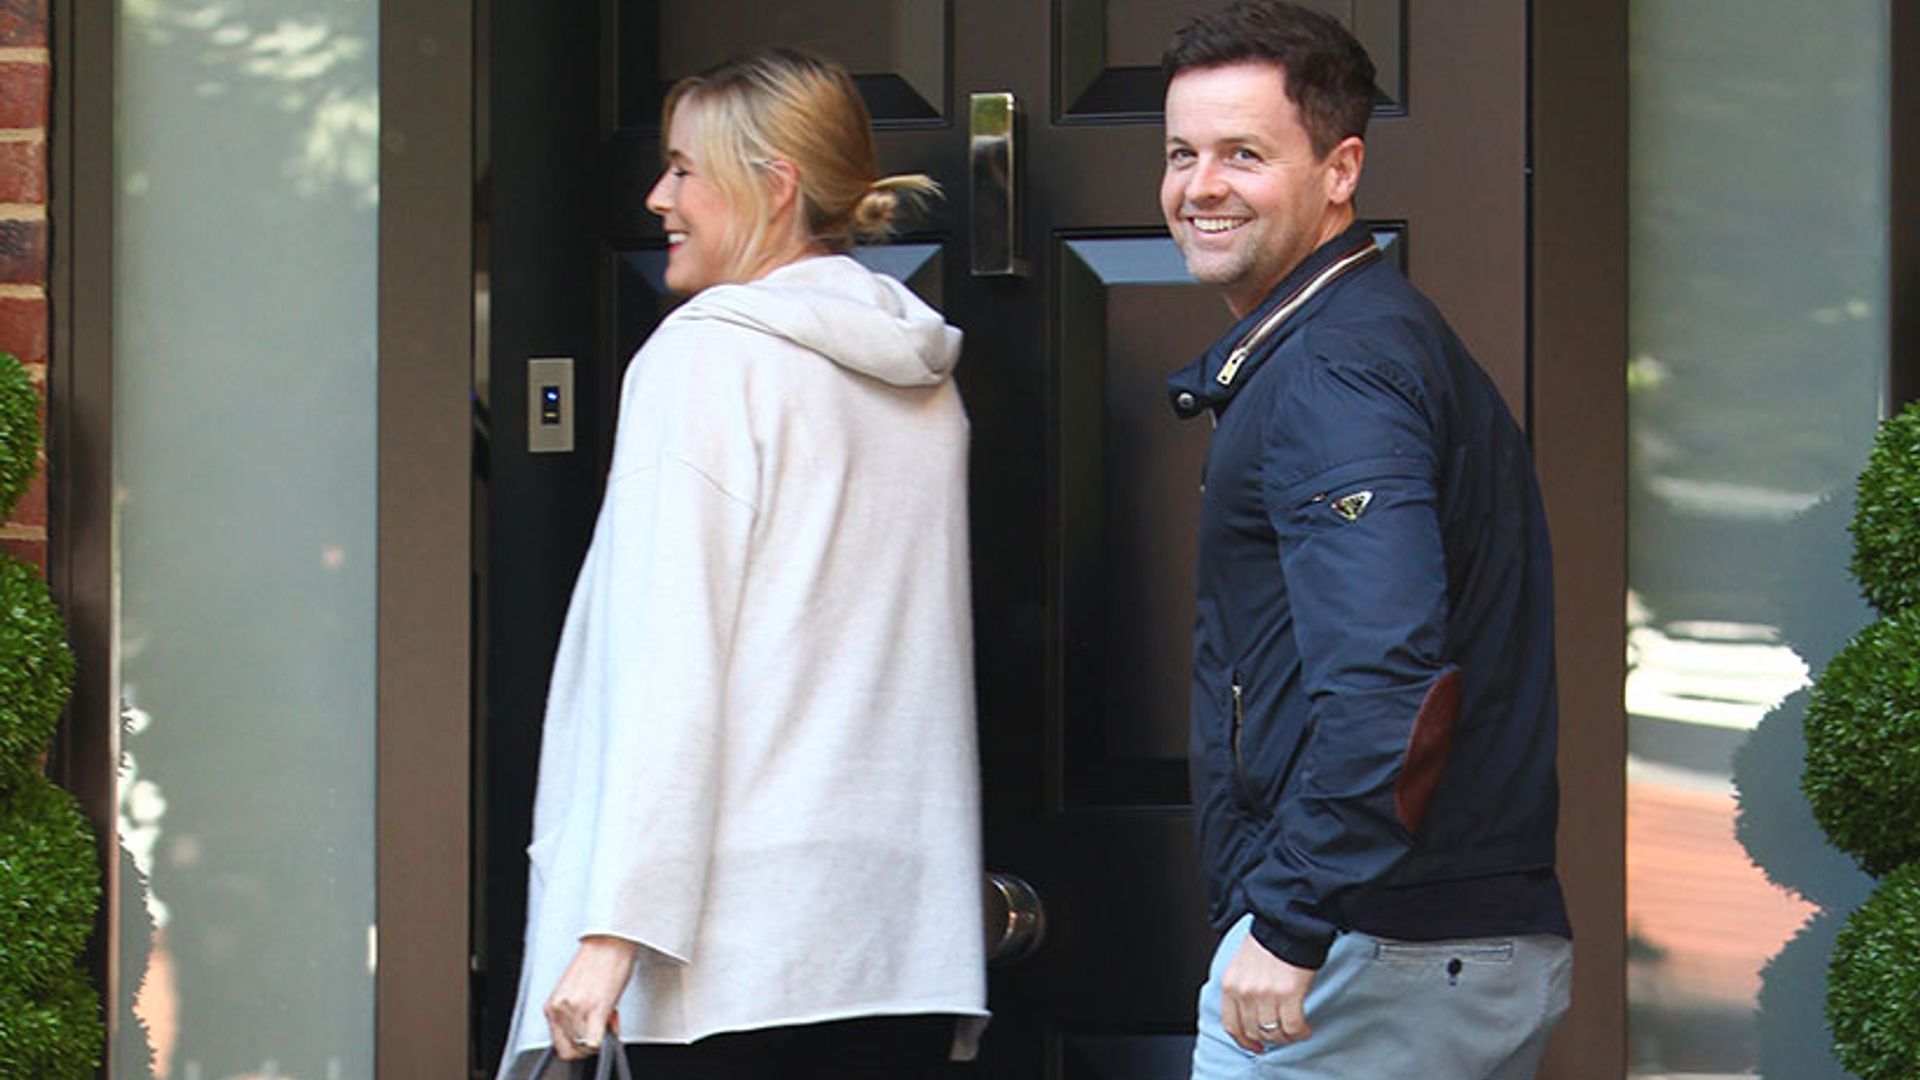 Declan Donnelly and Ali Astall are proud parents as they bring baby Isla home from hospital